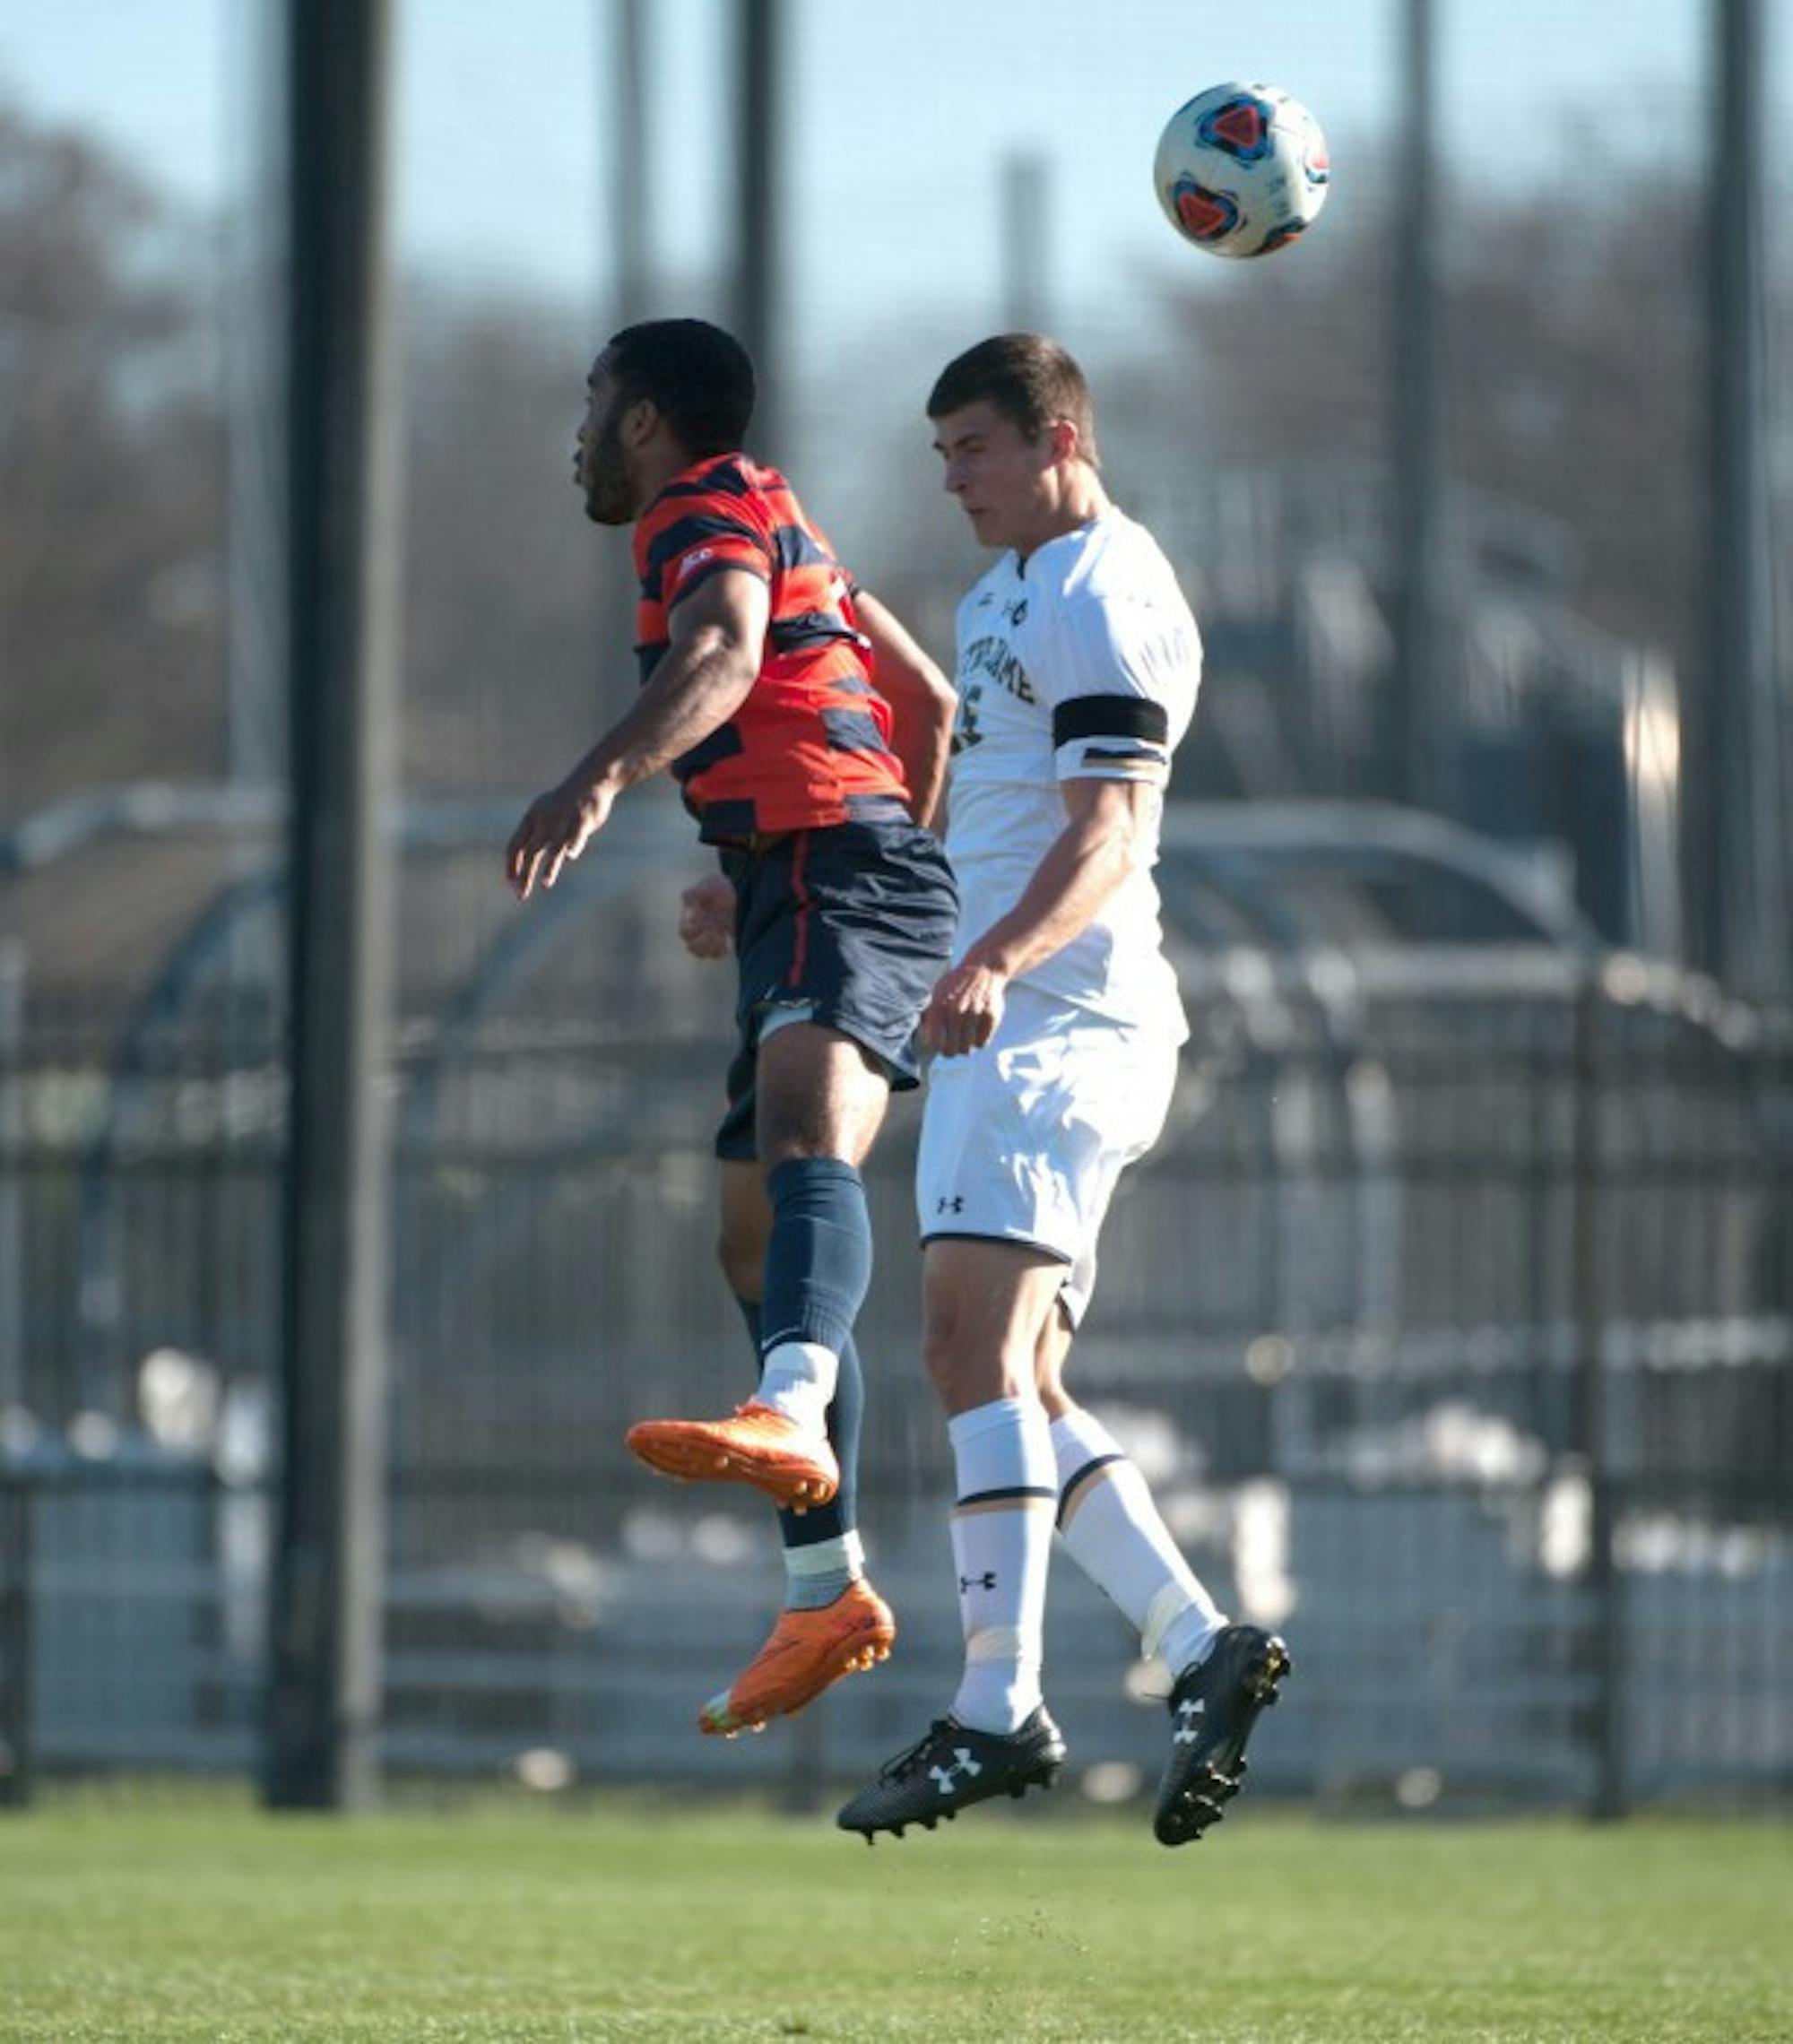 Senior midfielder Evan Panken jumps for a header in Notre Dame’s 1-0 loss to Syracuse on Sunday in the ACC title game.